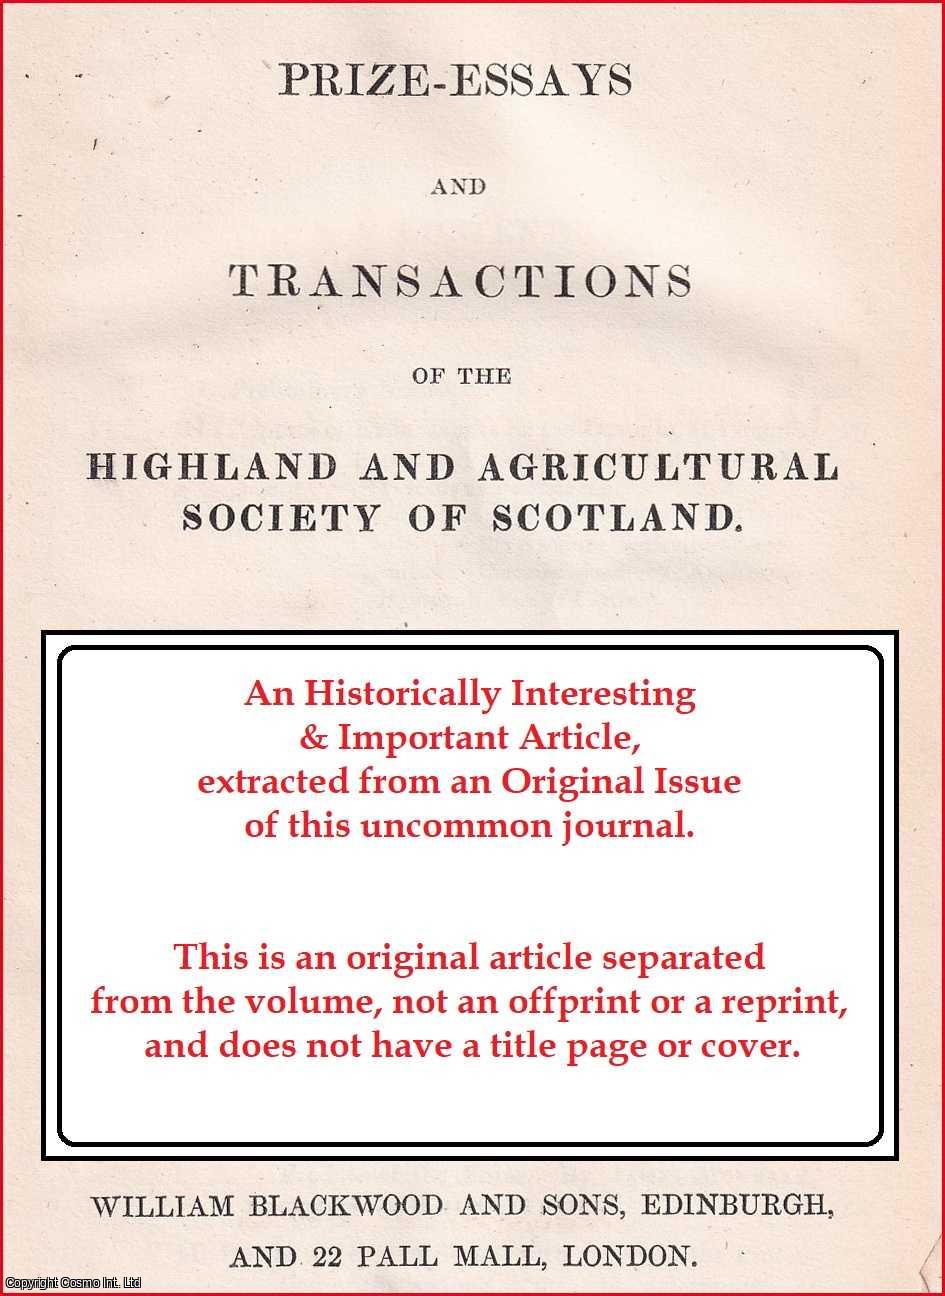 John Dudgeon, Esq. Spylaw. - The District of Kelso, Scotland. An uncommon original article from the Prize Essays and Transactions of the Highland Society of Scotland, 1831.